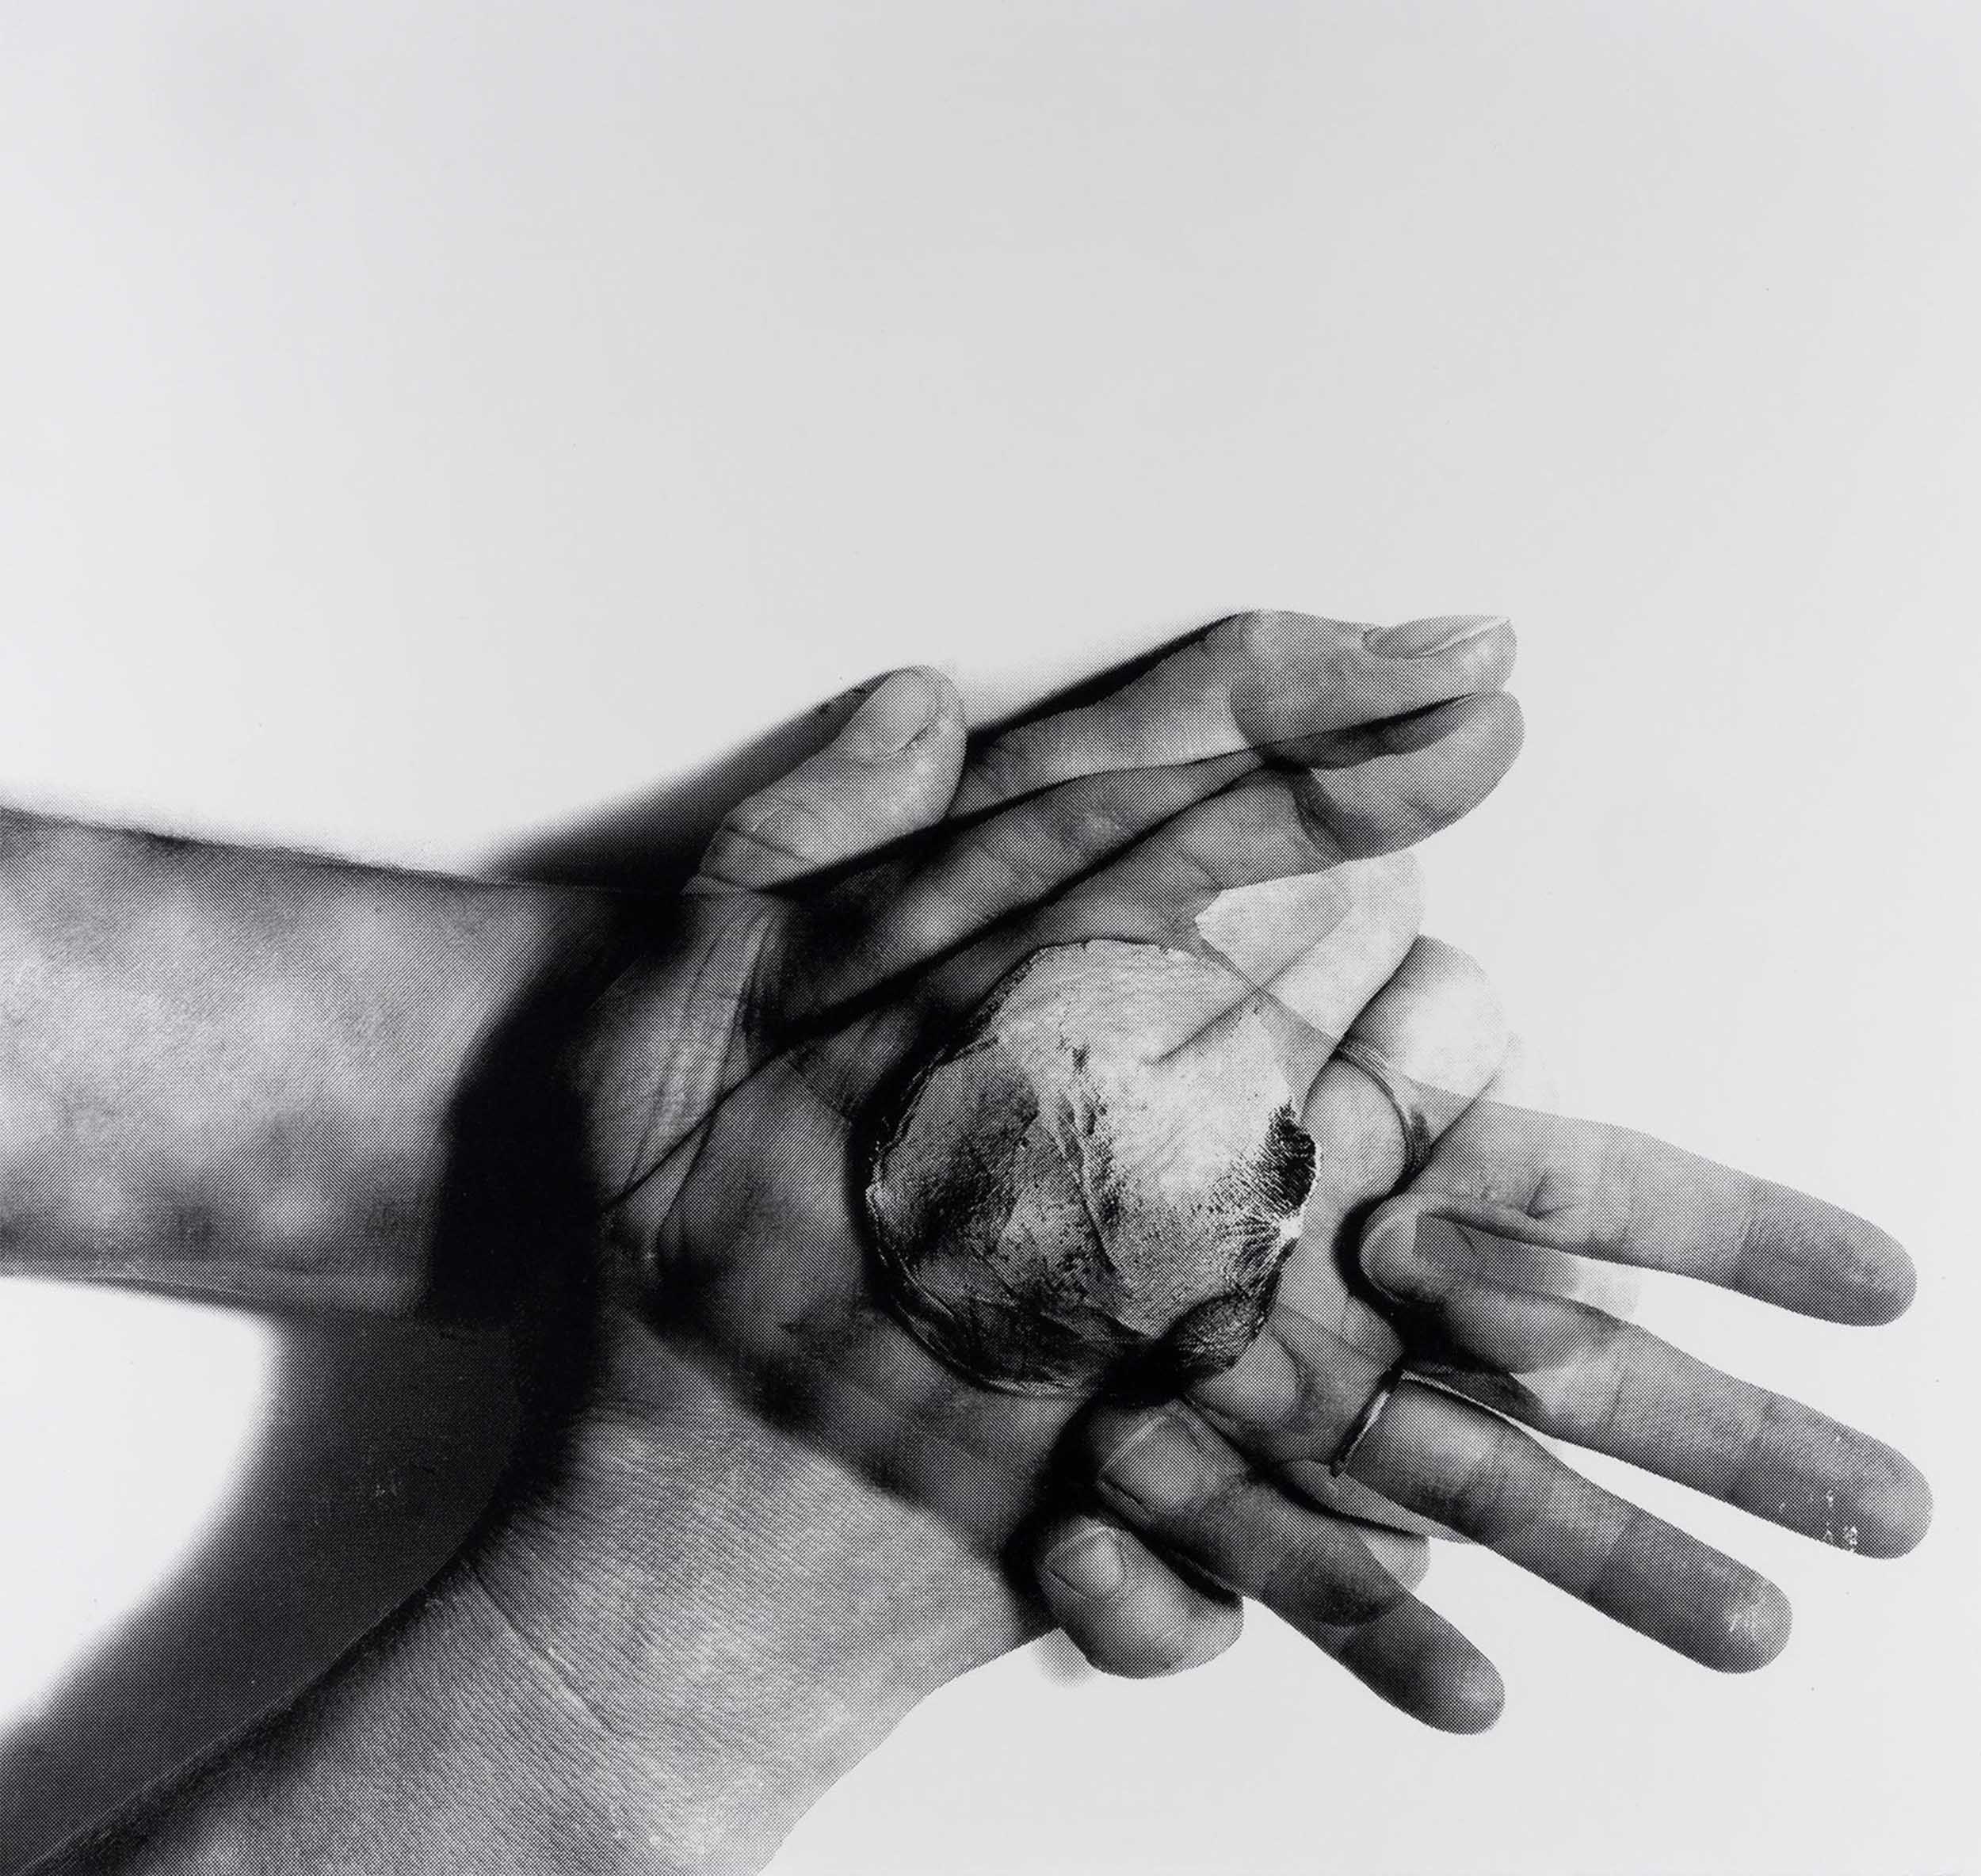 Silkscreen of two hands pressed together at the palm with a ceramic disk pressed between them. The disk is visible due to transparent image overlay similar to an x-ray.